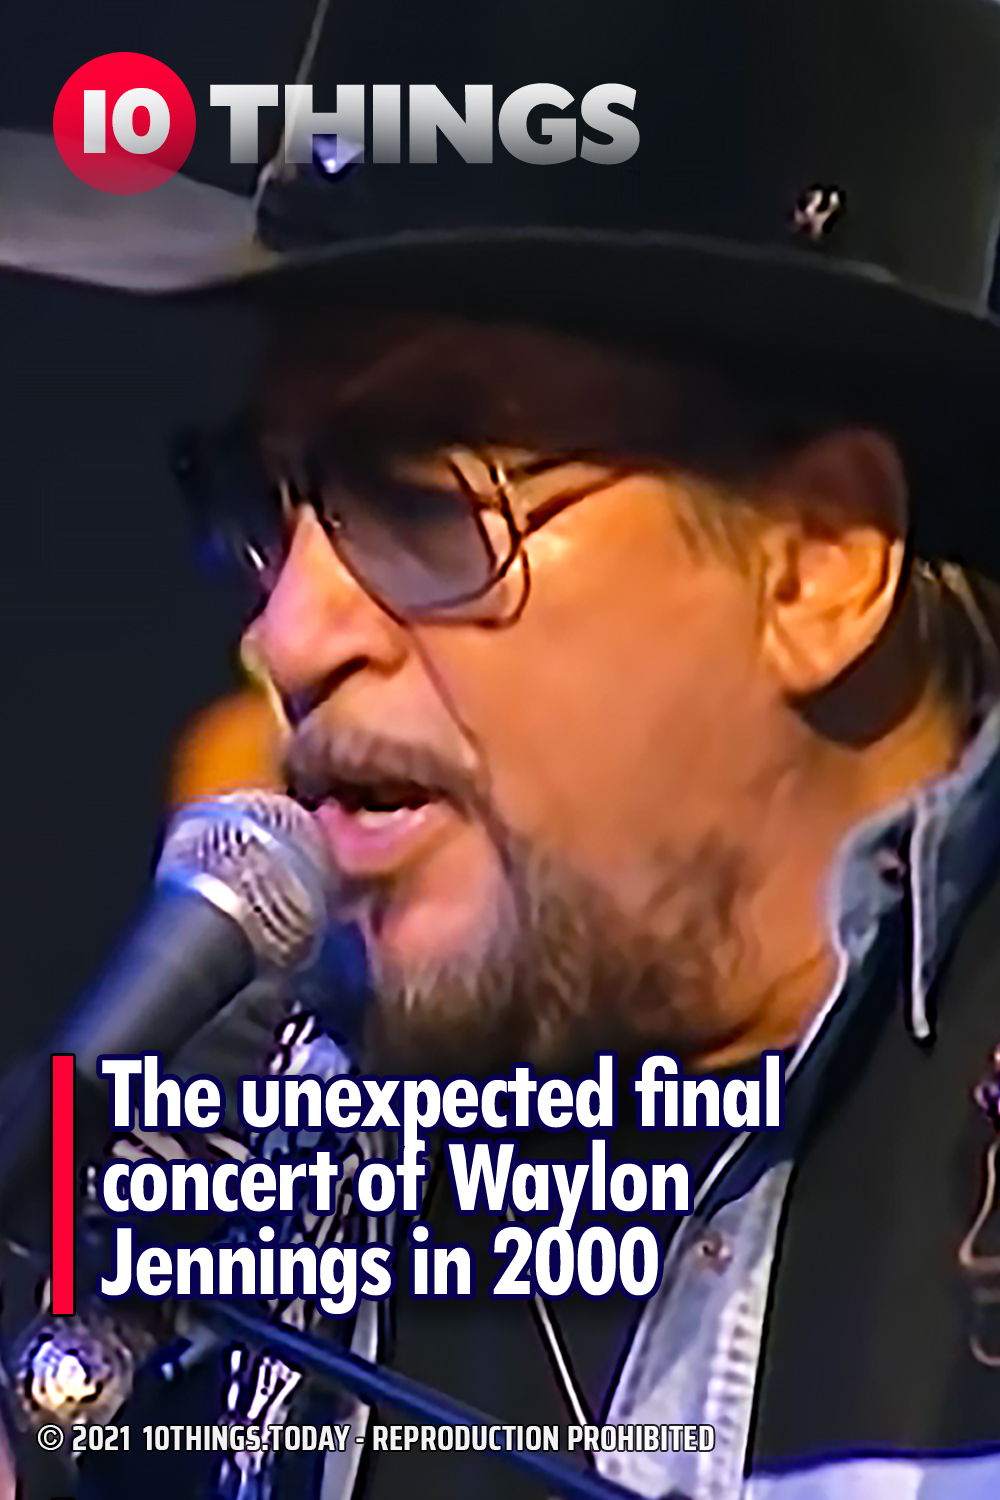 The unexpected final concert of Waylon Jennings in 2000